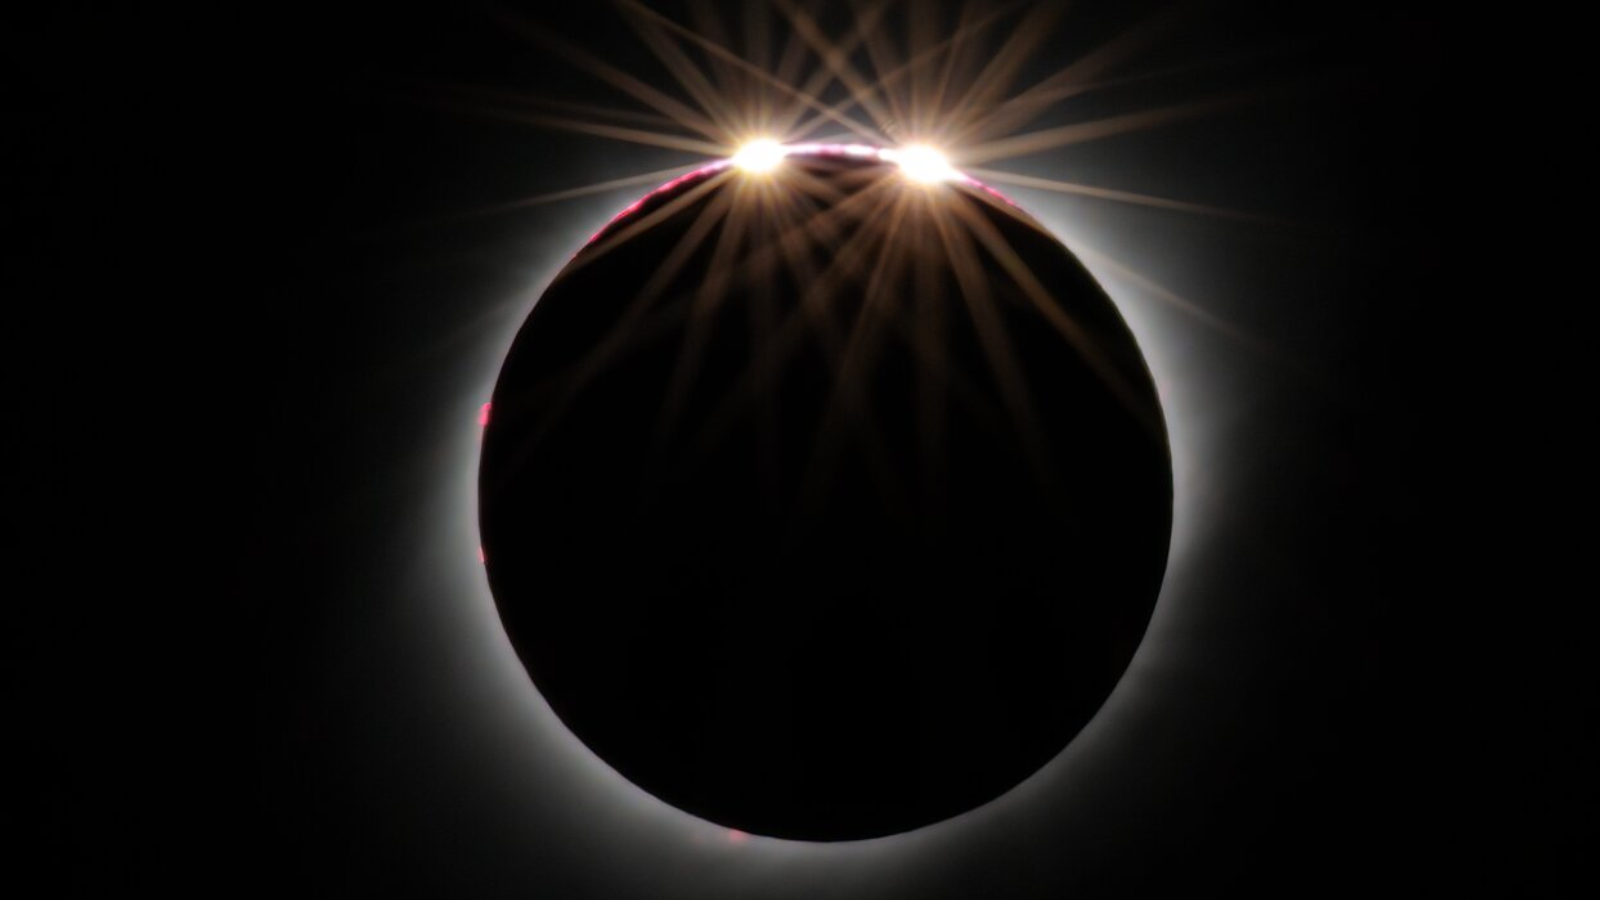 The April 8 solar eclipse will bring weird sights, sounds and feelings Space